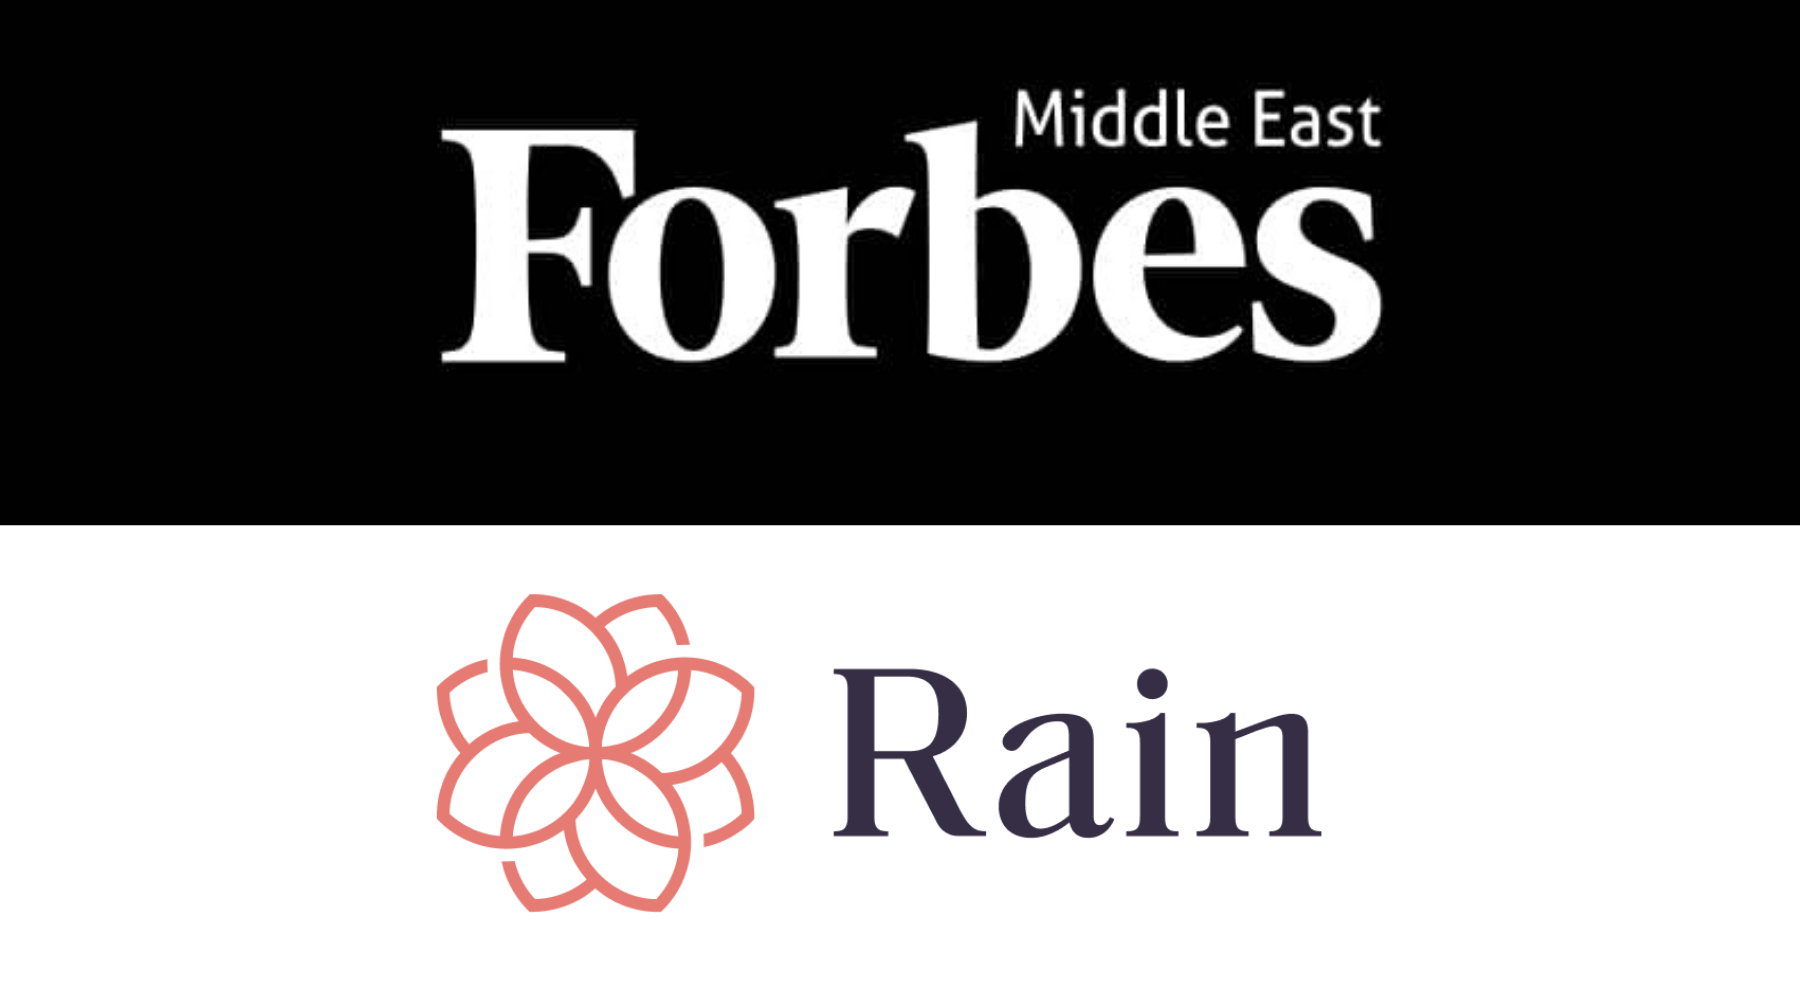 Forbes Middle East & Rain Launch 'Crypto Bytes' in Collaboration with Twitter